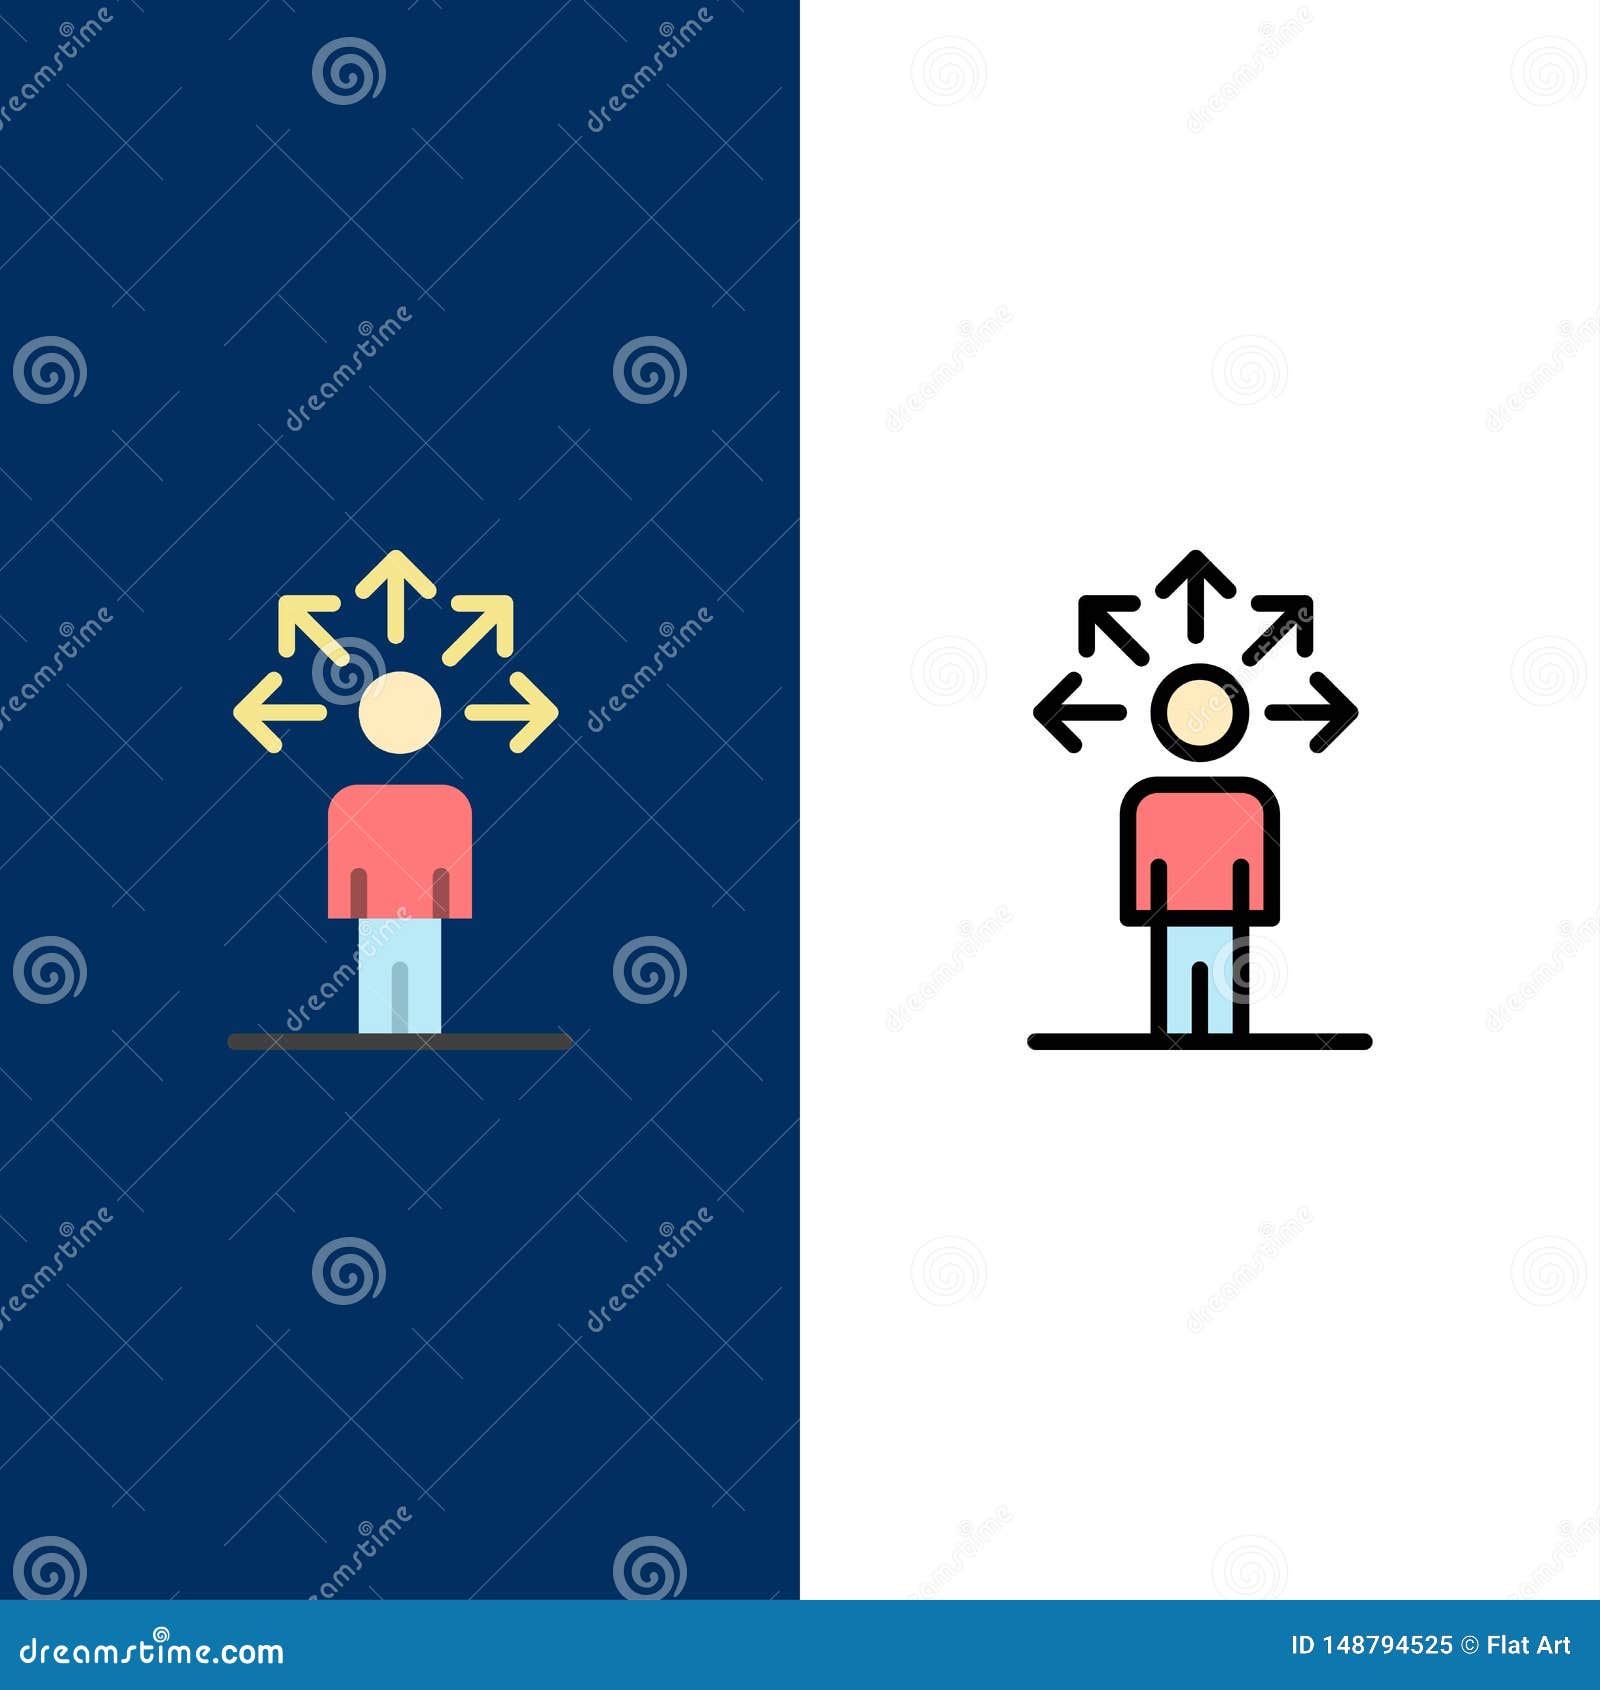 communication, abilities, connection, human  icons. flat and line filled icon set  blue background